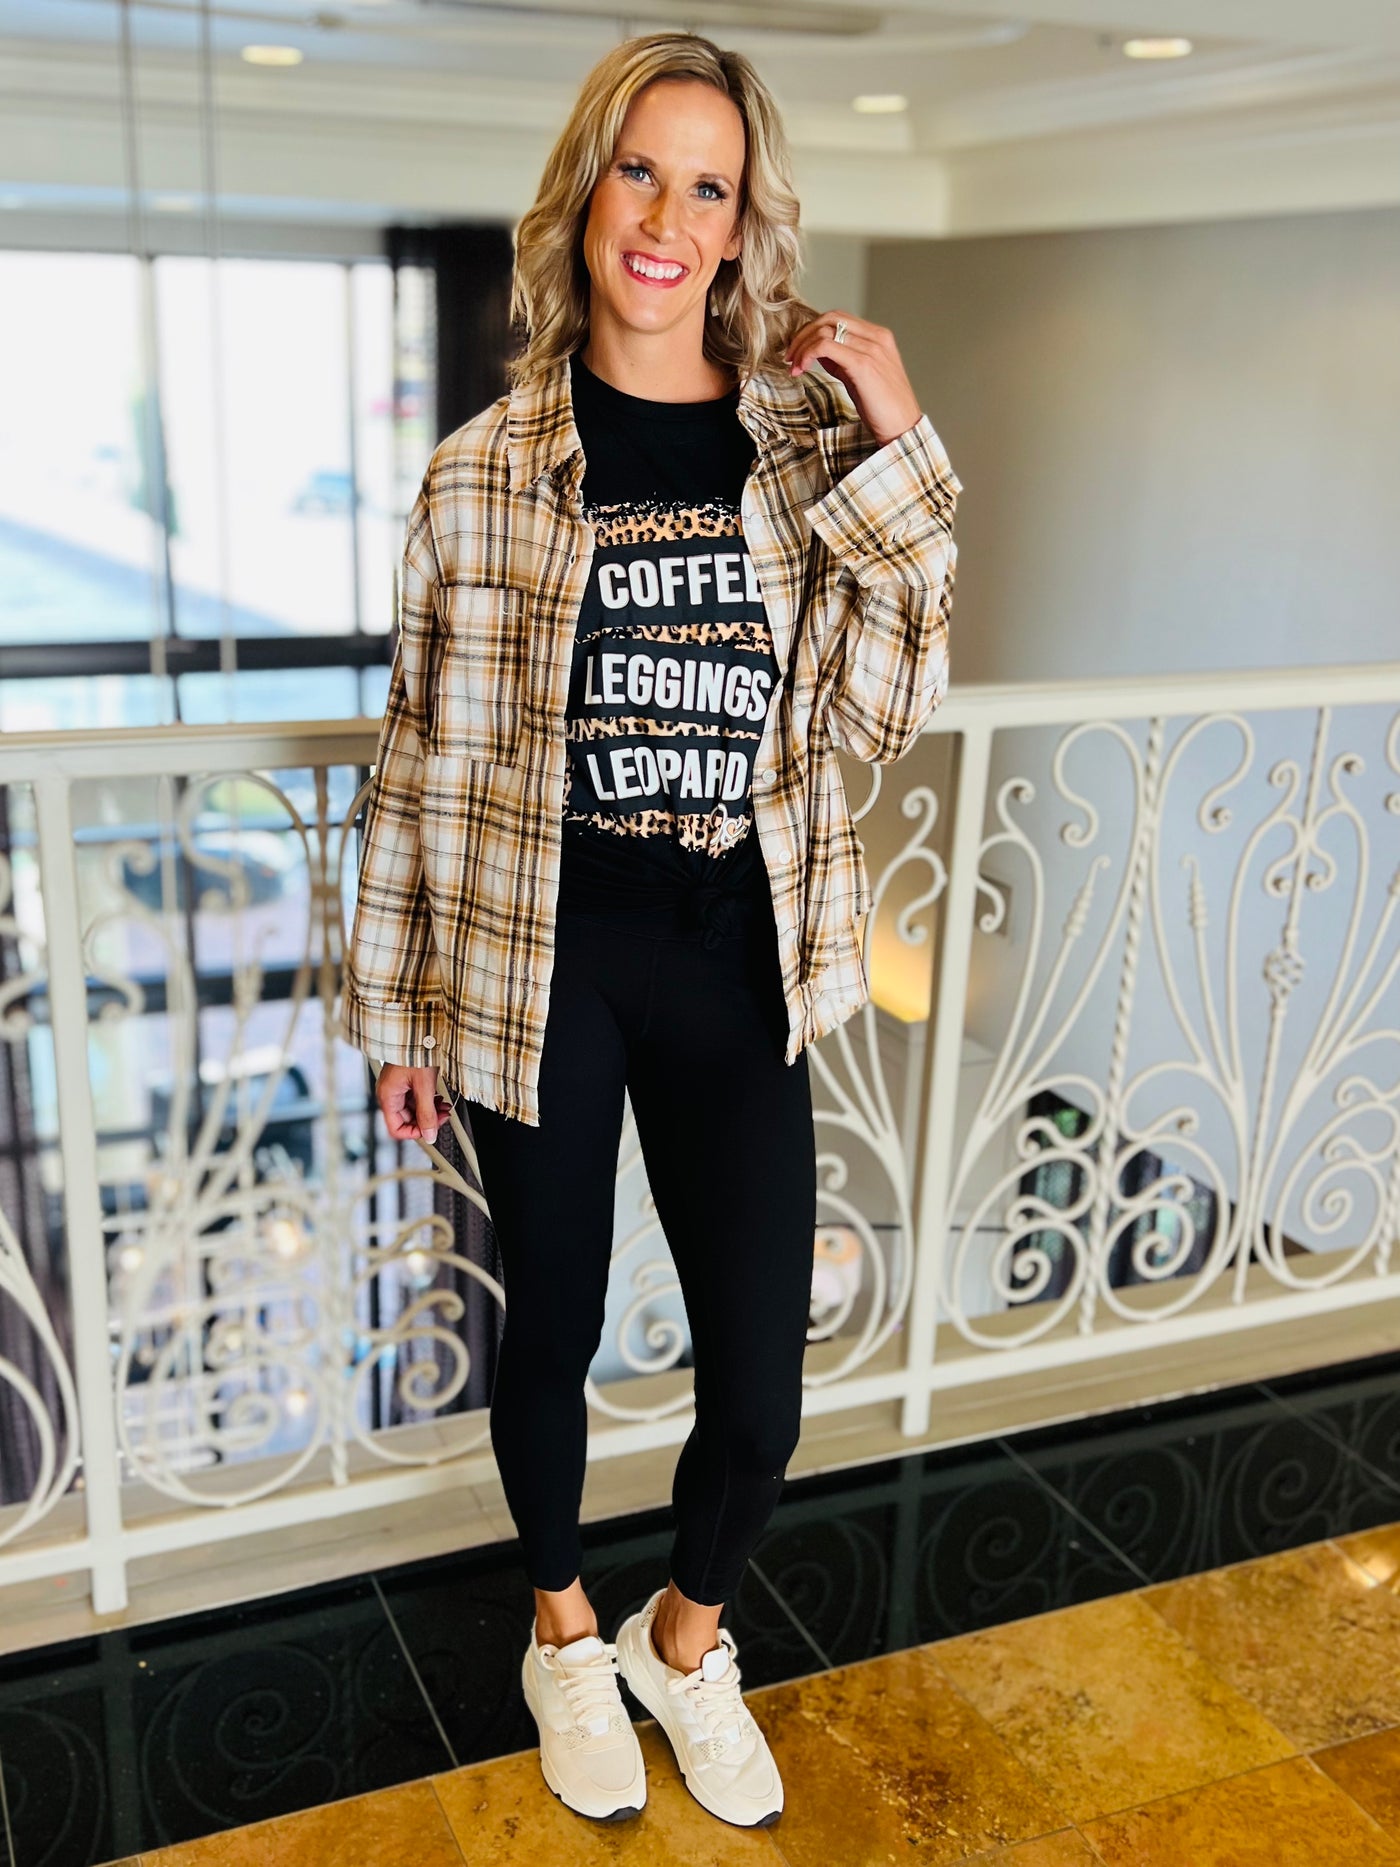 Coffee Leggings Leopard Done Graphic Tee-Harps & Oli-Shop Anchored Bliss Women's Boutique Clothing Store